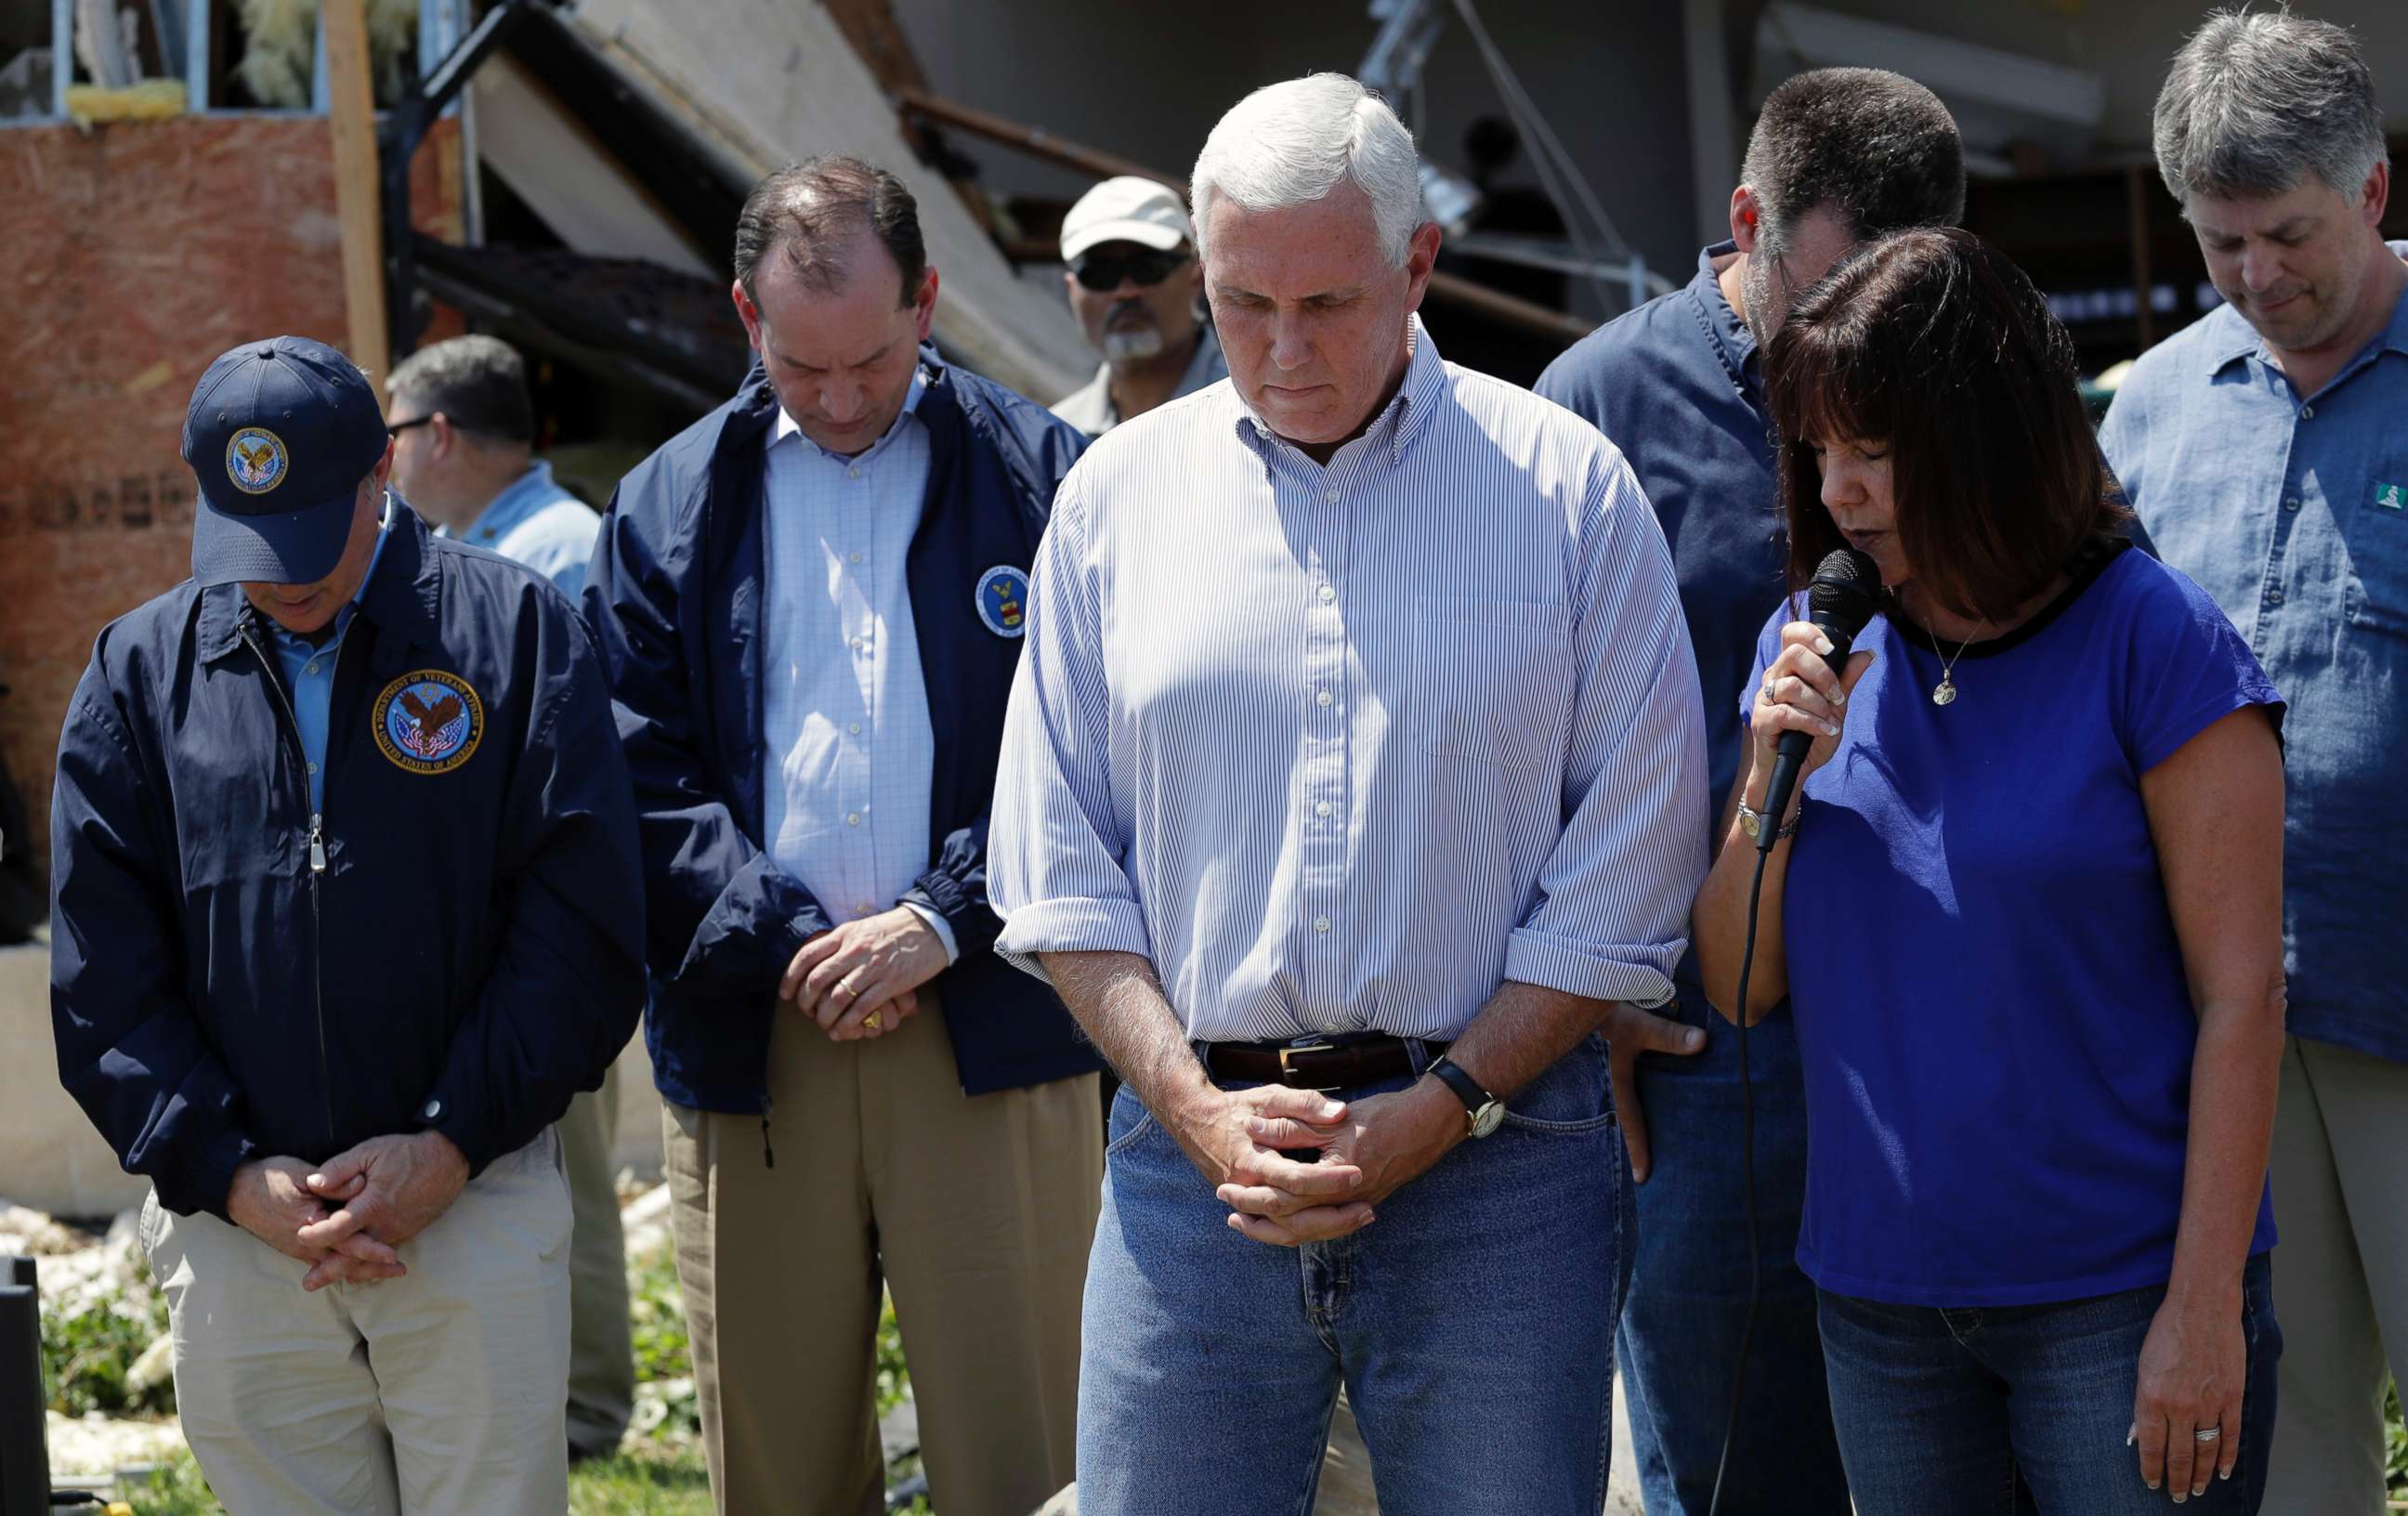 PHOTO: Vice President Mike Pence, center, and others bow their heads as his wife, Karen says a prayer during the couple's visit to the First Baptist Church of Rockport, Aug. 31, 2017, in Rockport, Texas.